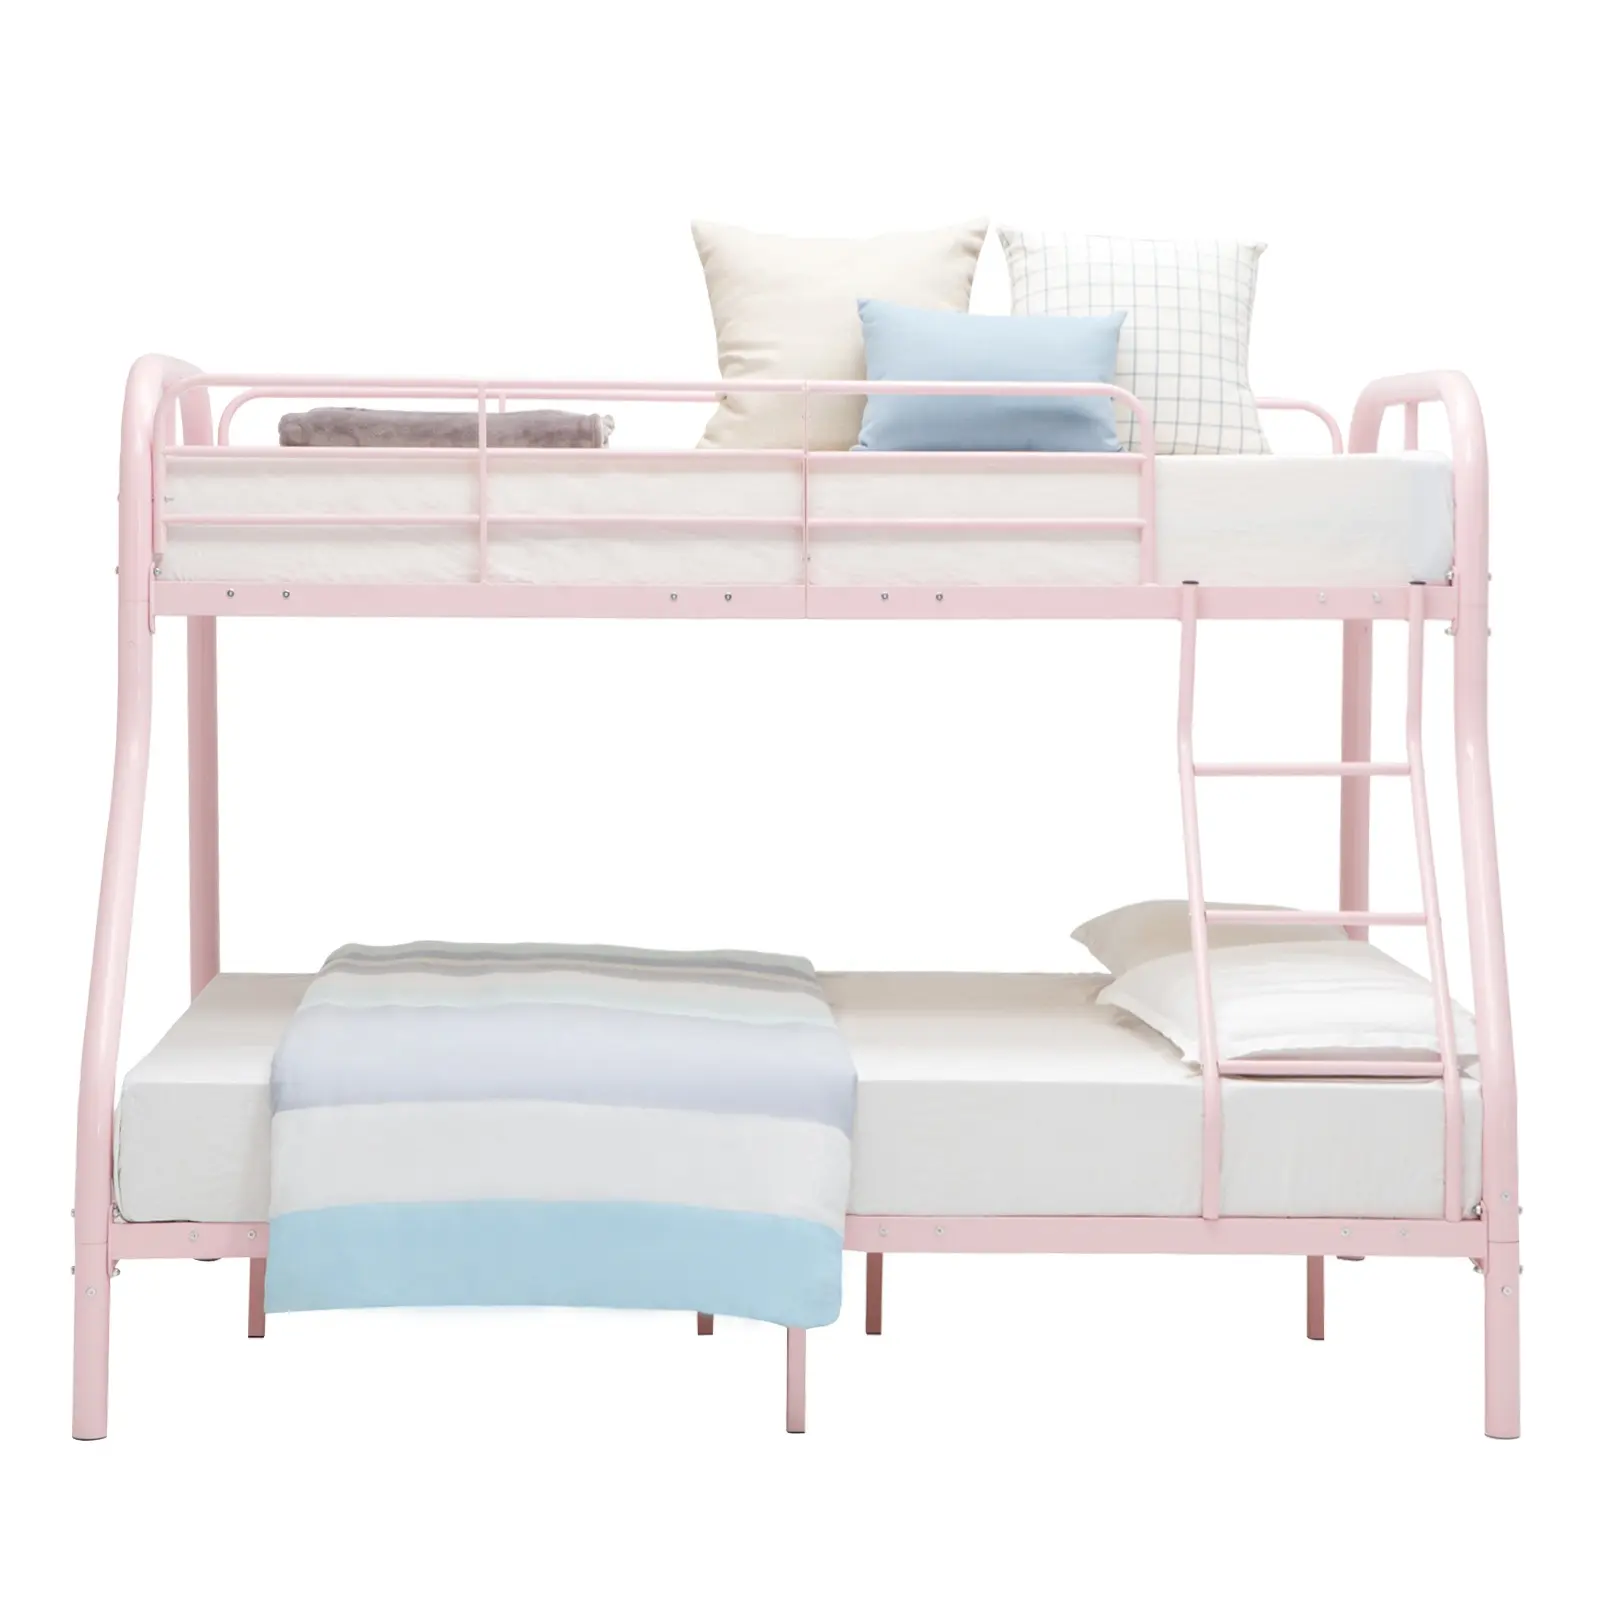 Commercial Furniture General Use and Metal steel wood Material 2 step bed double size/adult bunk beds